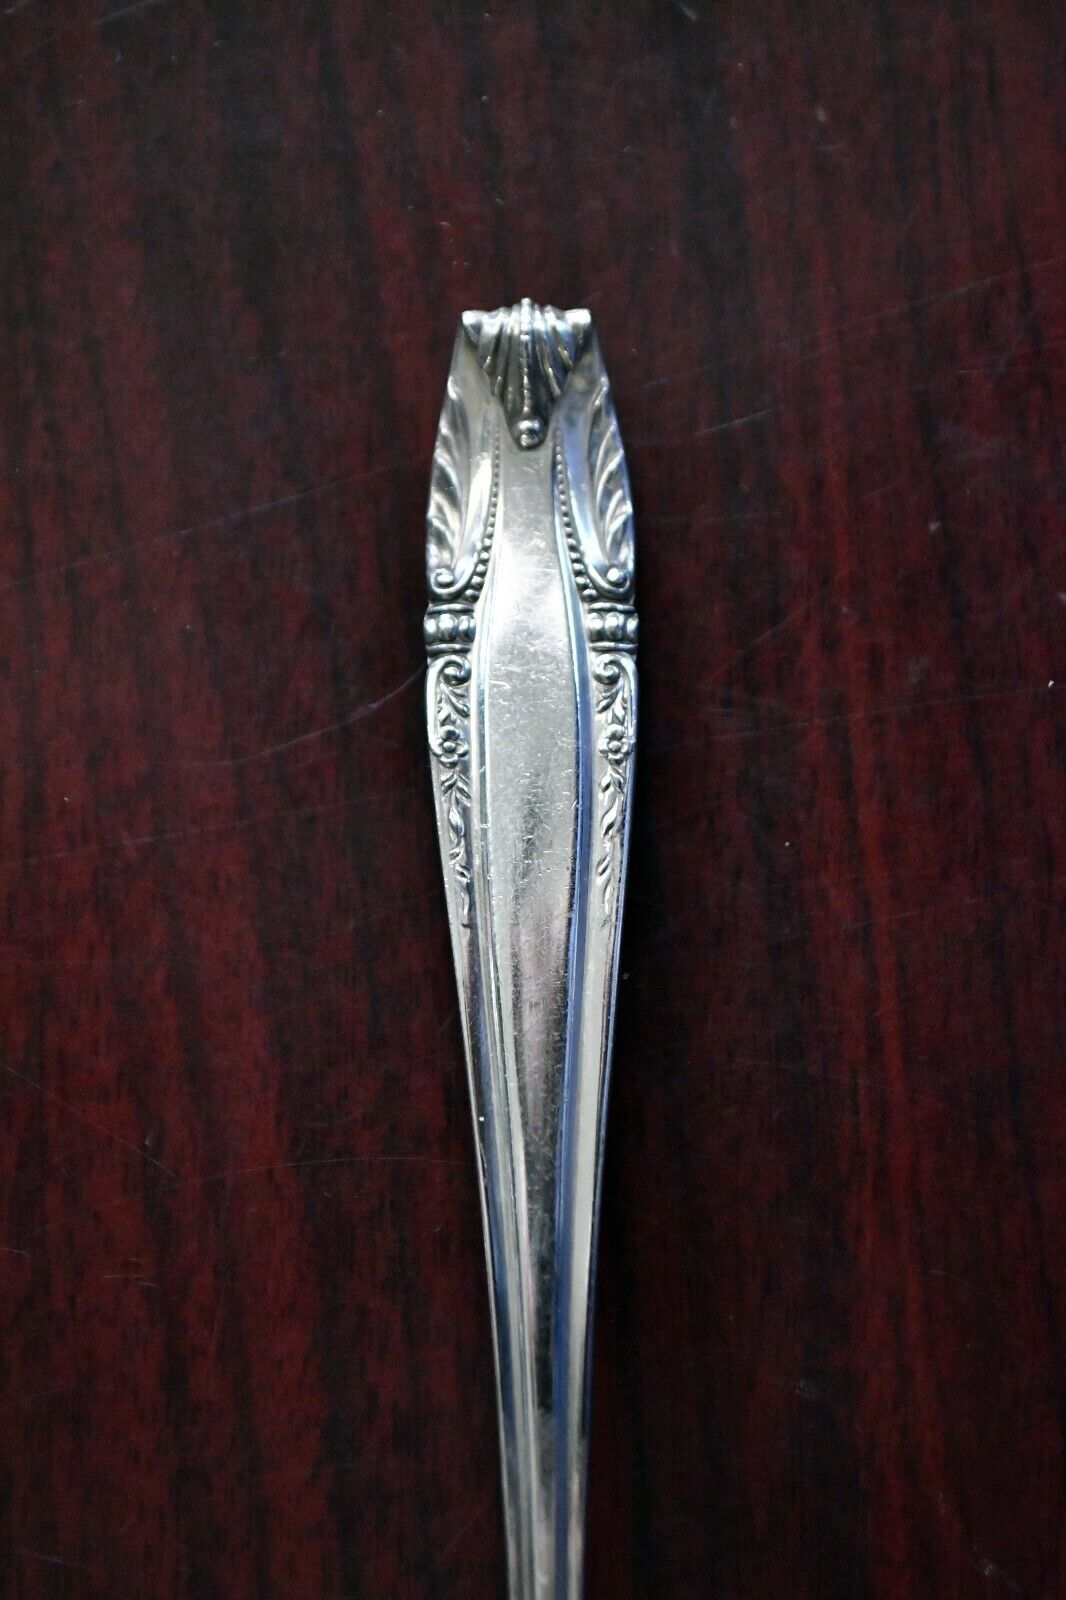 Stradivari by Wallace Sterling Silver Solid 7 1/4" Dinner Fork 1.5 oz.